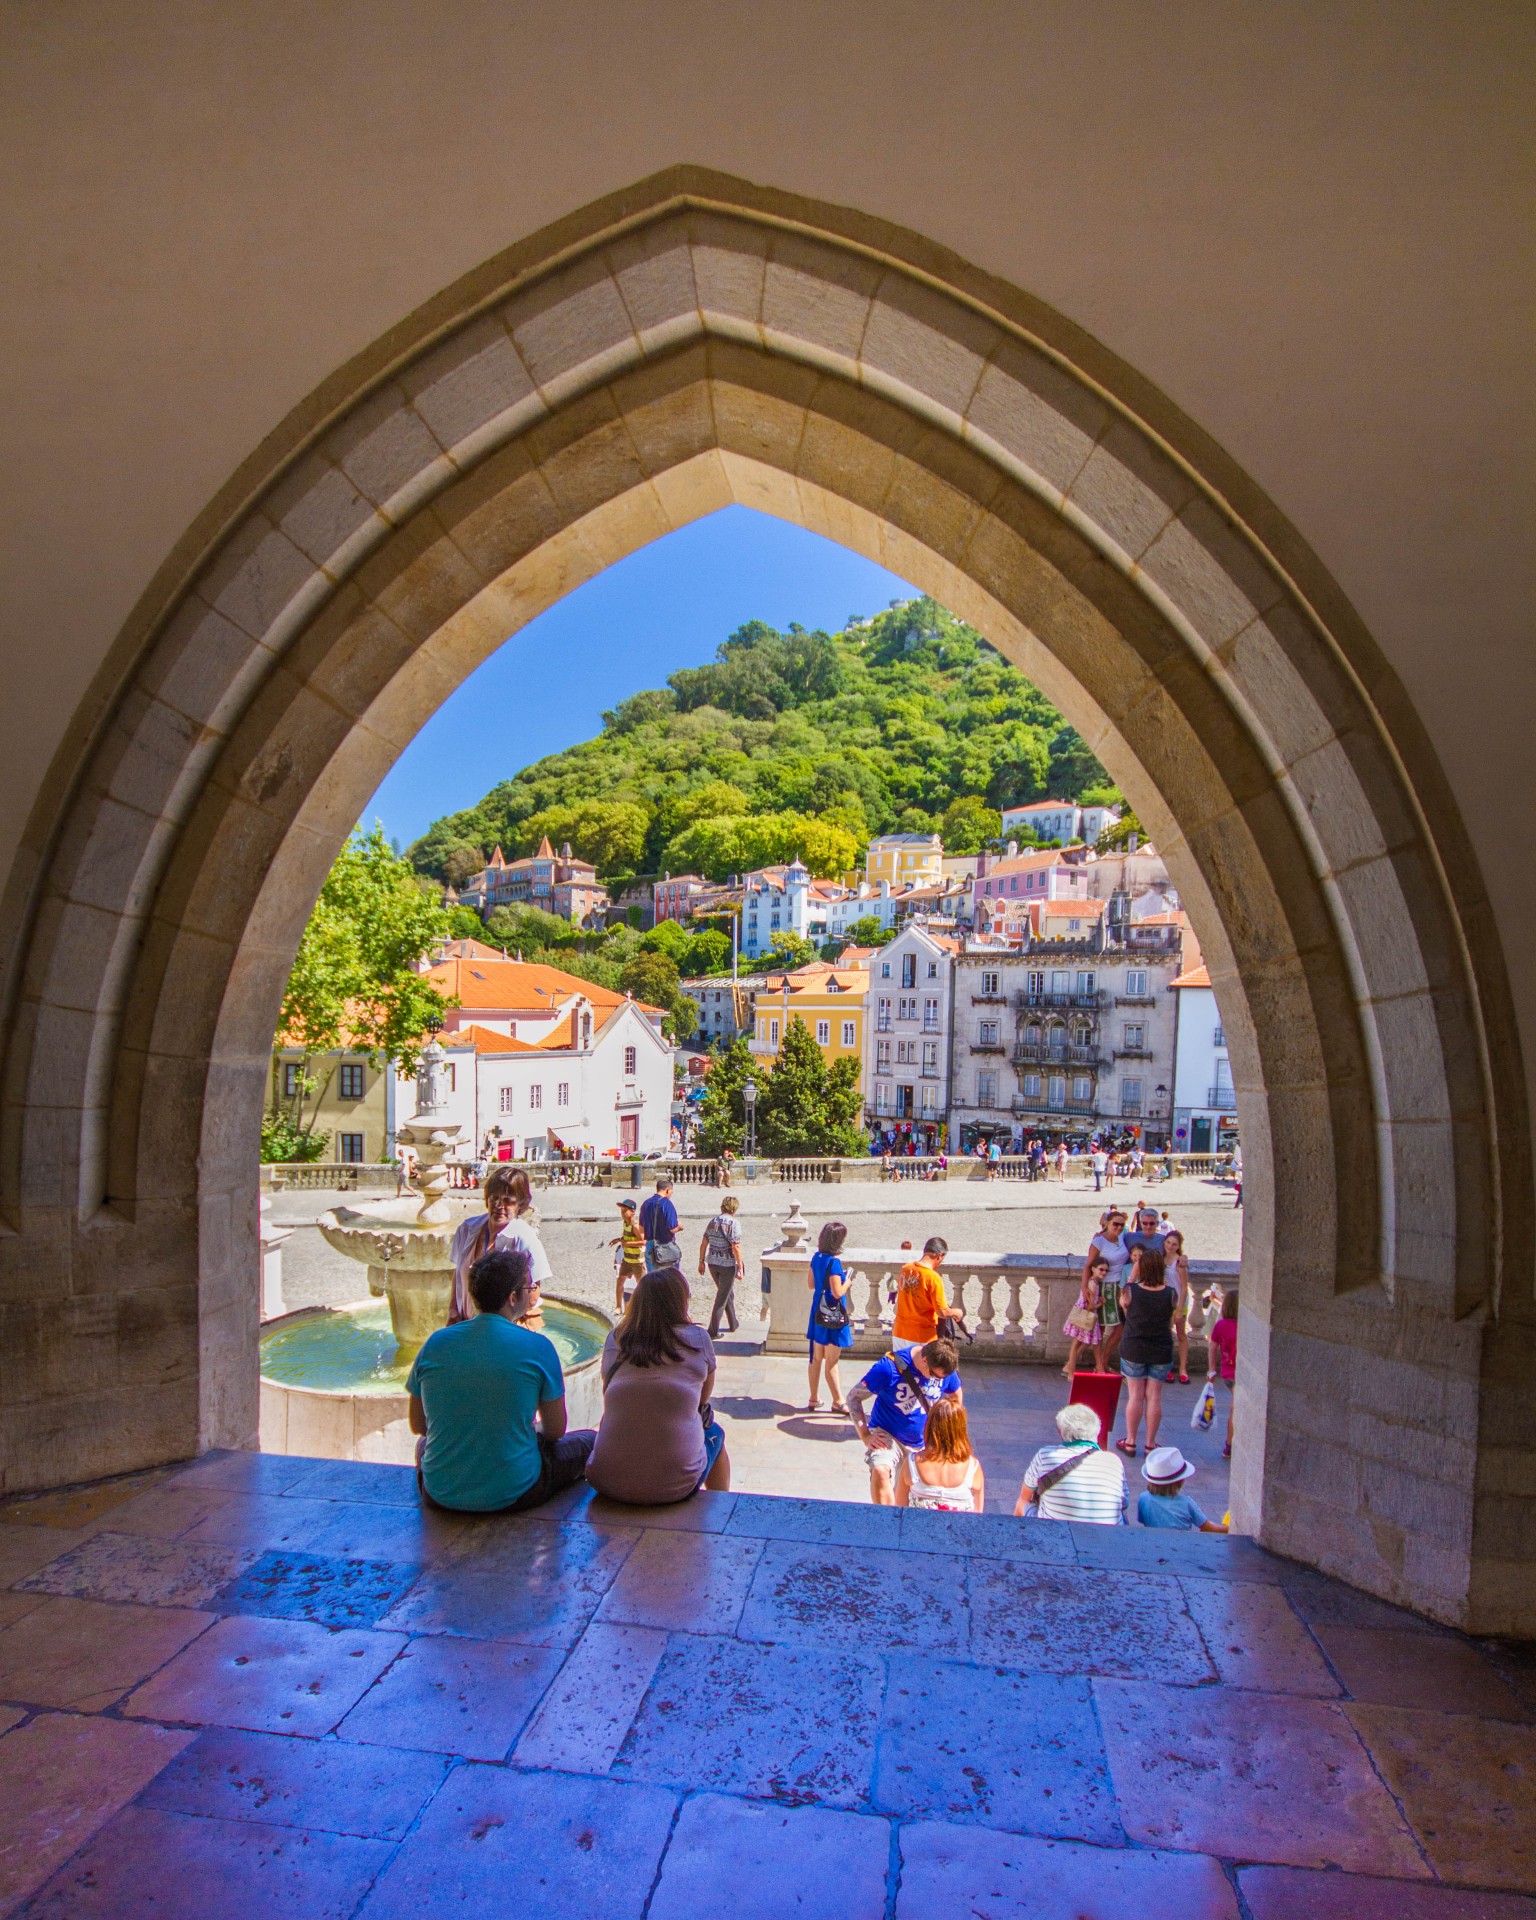 Tourists walking through an historic city viewed through a peaked archway - Sintra, Portugal